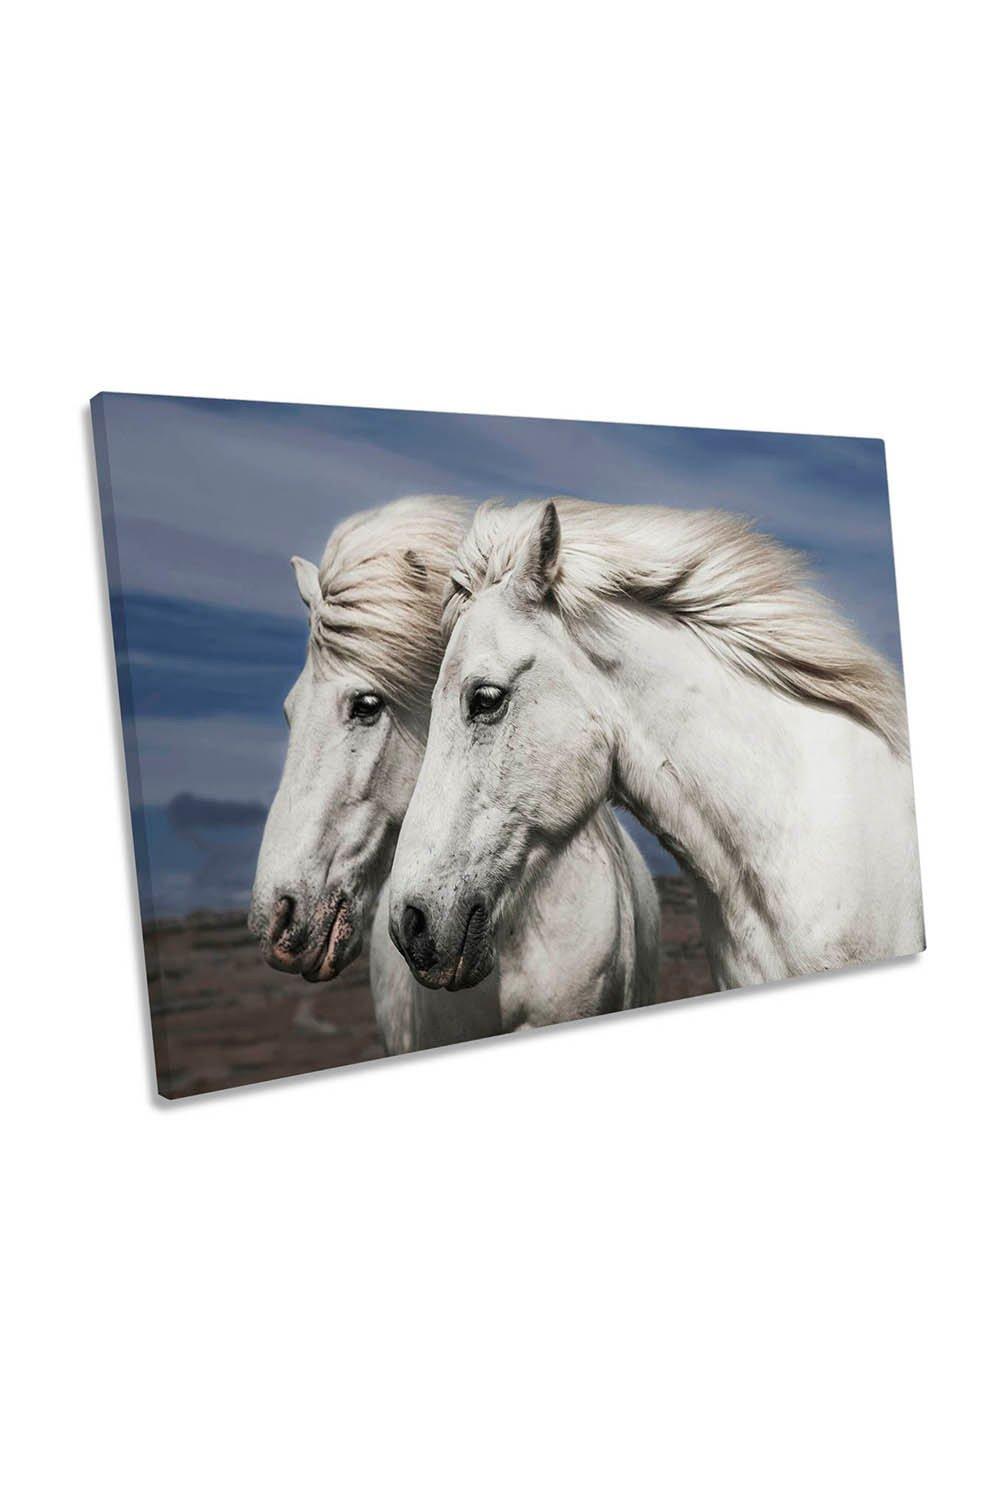 White Horse Couple Canvas Wall Art Picture Print